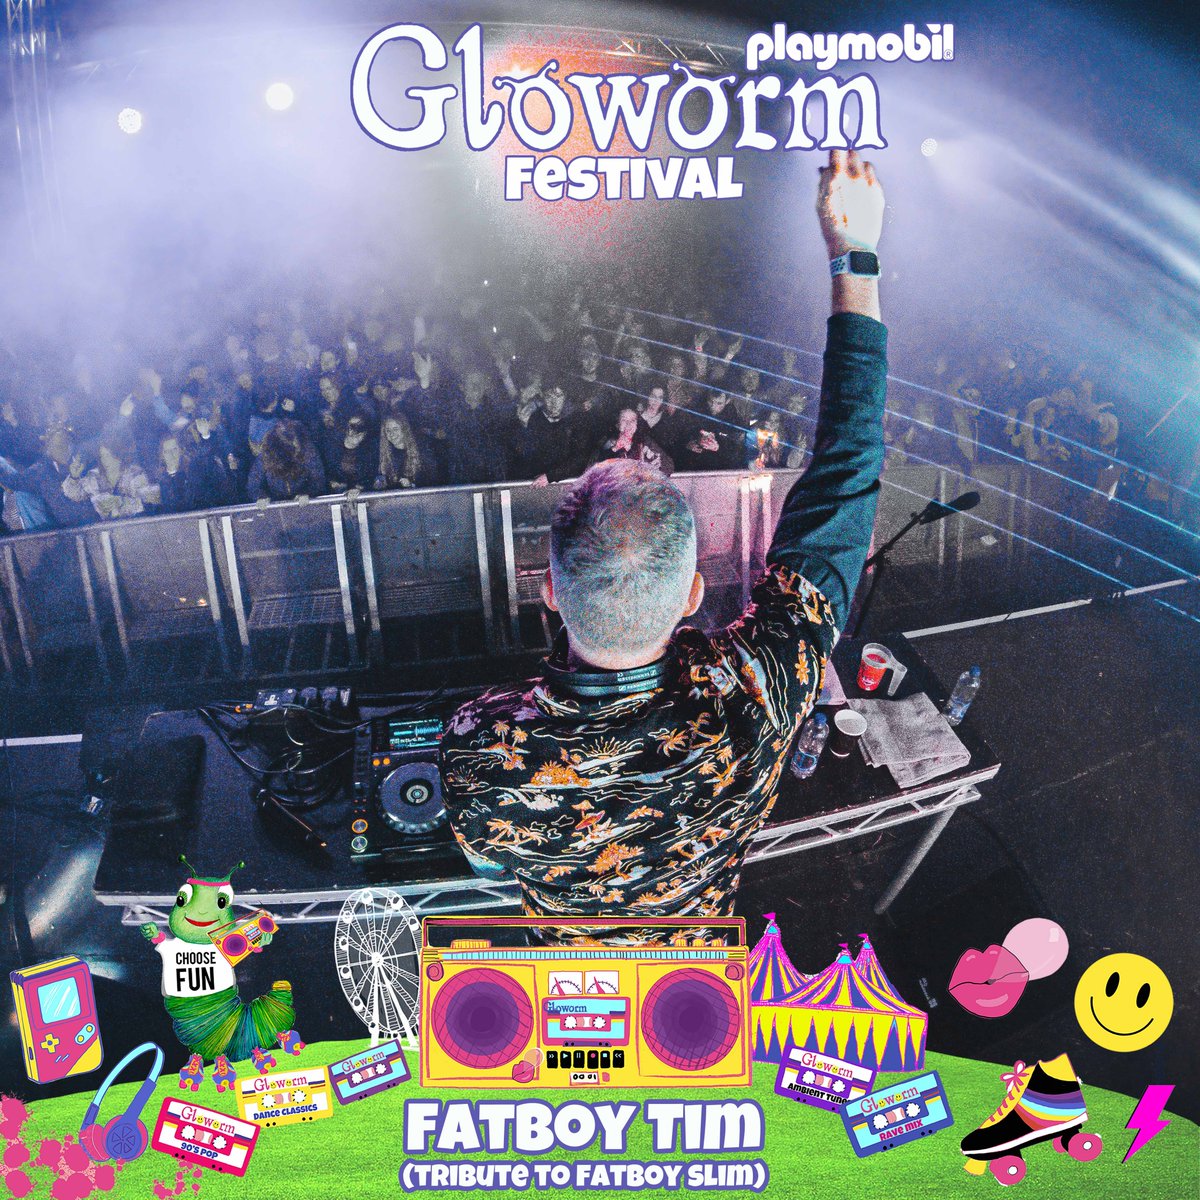 Calling all campers, this one's for you 📢 Fatboy Tim will be performing live on the main stage on Friday 16th August bringing those Friday night vibes to Gloworm exclusively for our Campers, Glampers & live-in vehicle festival goers! 🤩🎉